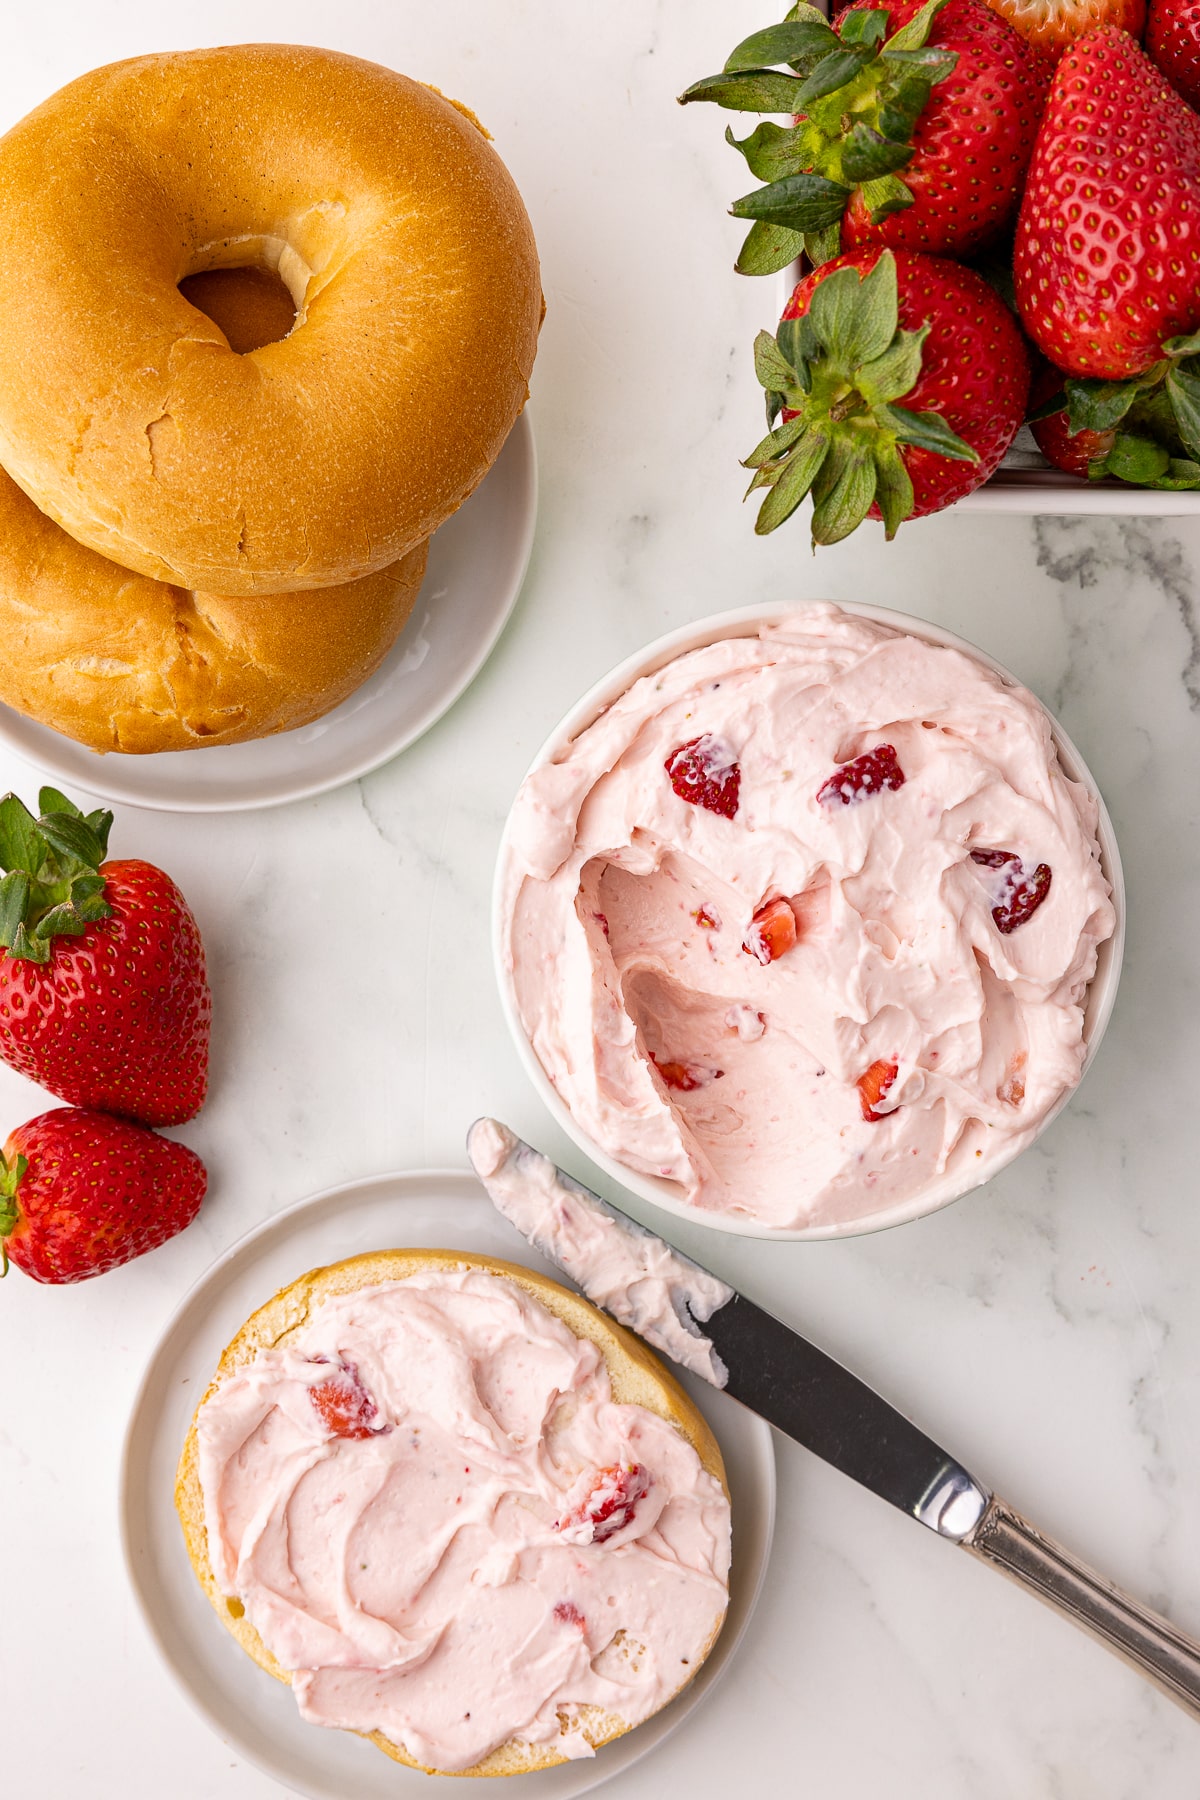 strawberry cream cheese on a plain bagel with a bowl of strawberry cream cheese, a berry basket with fresh strawberries